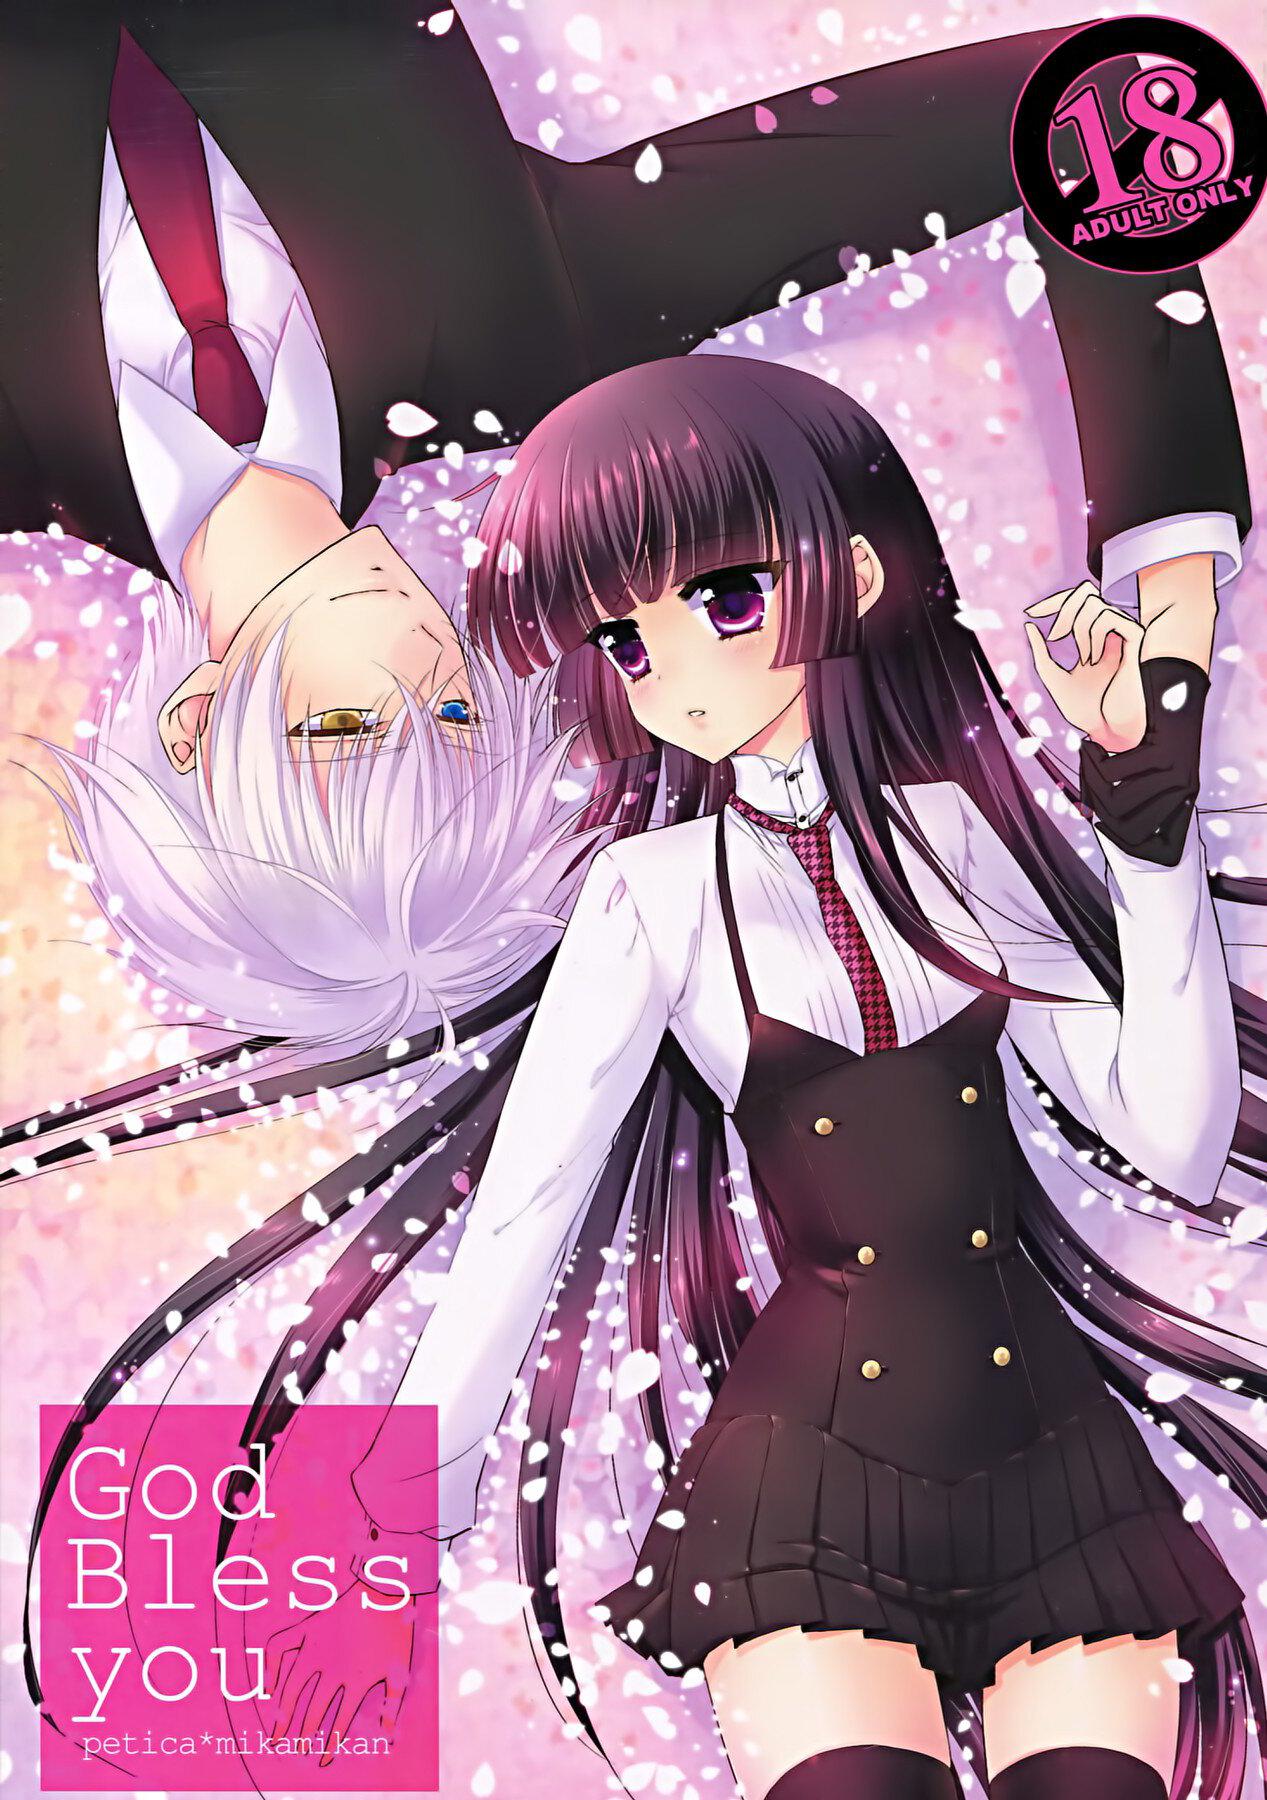 Gozada God bless you - Inu x boku ss Student - Picture 1